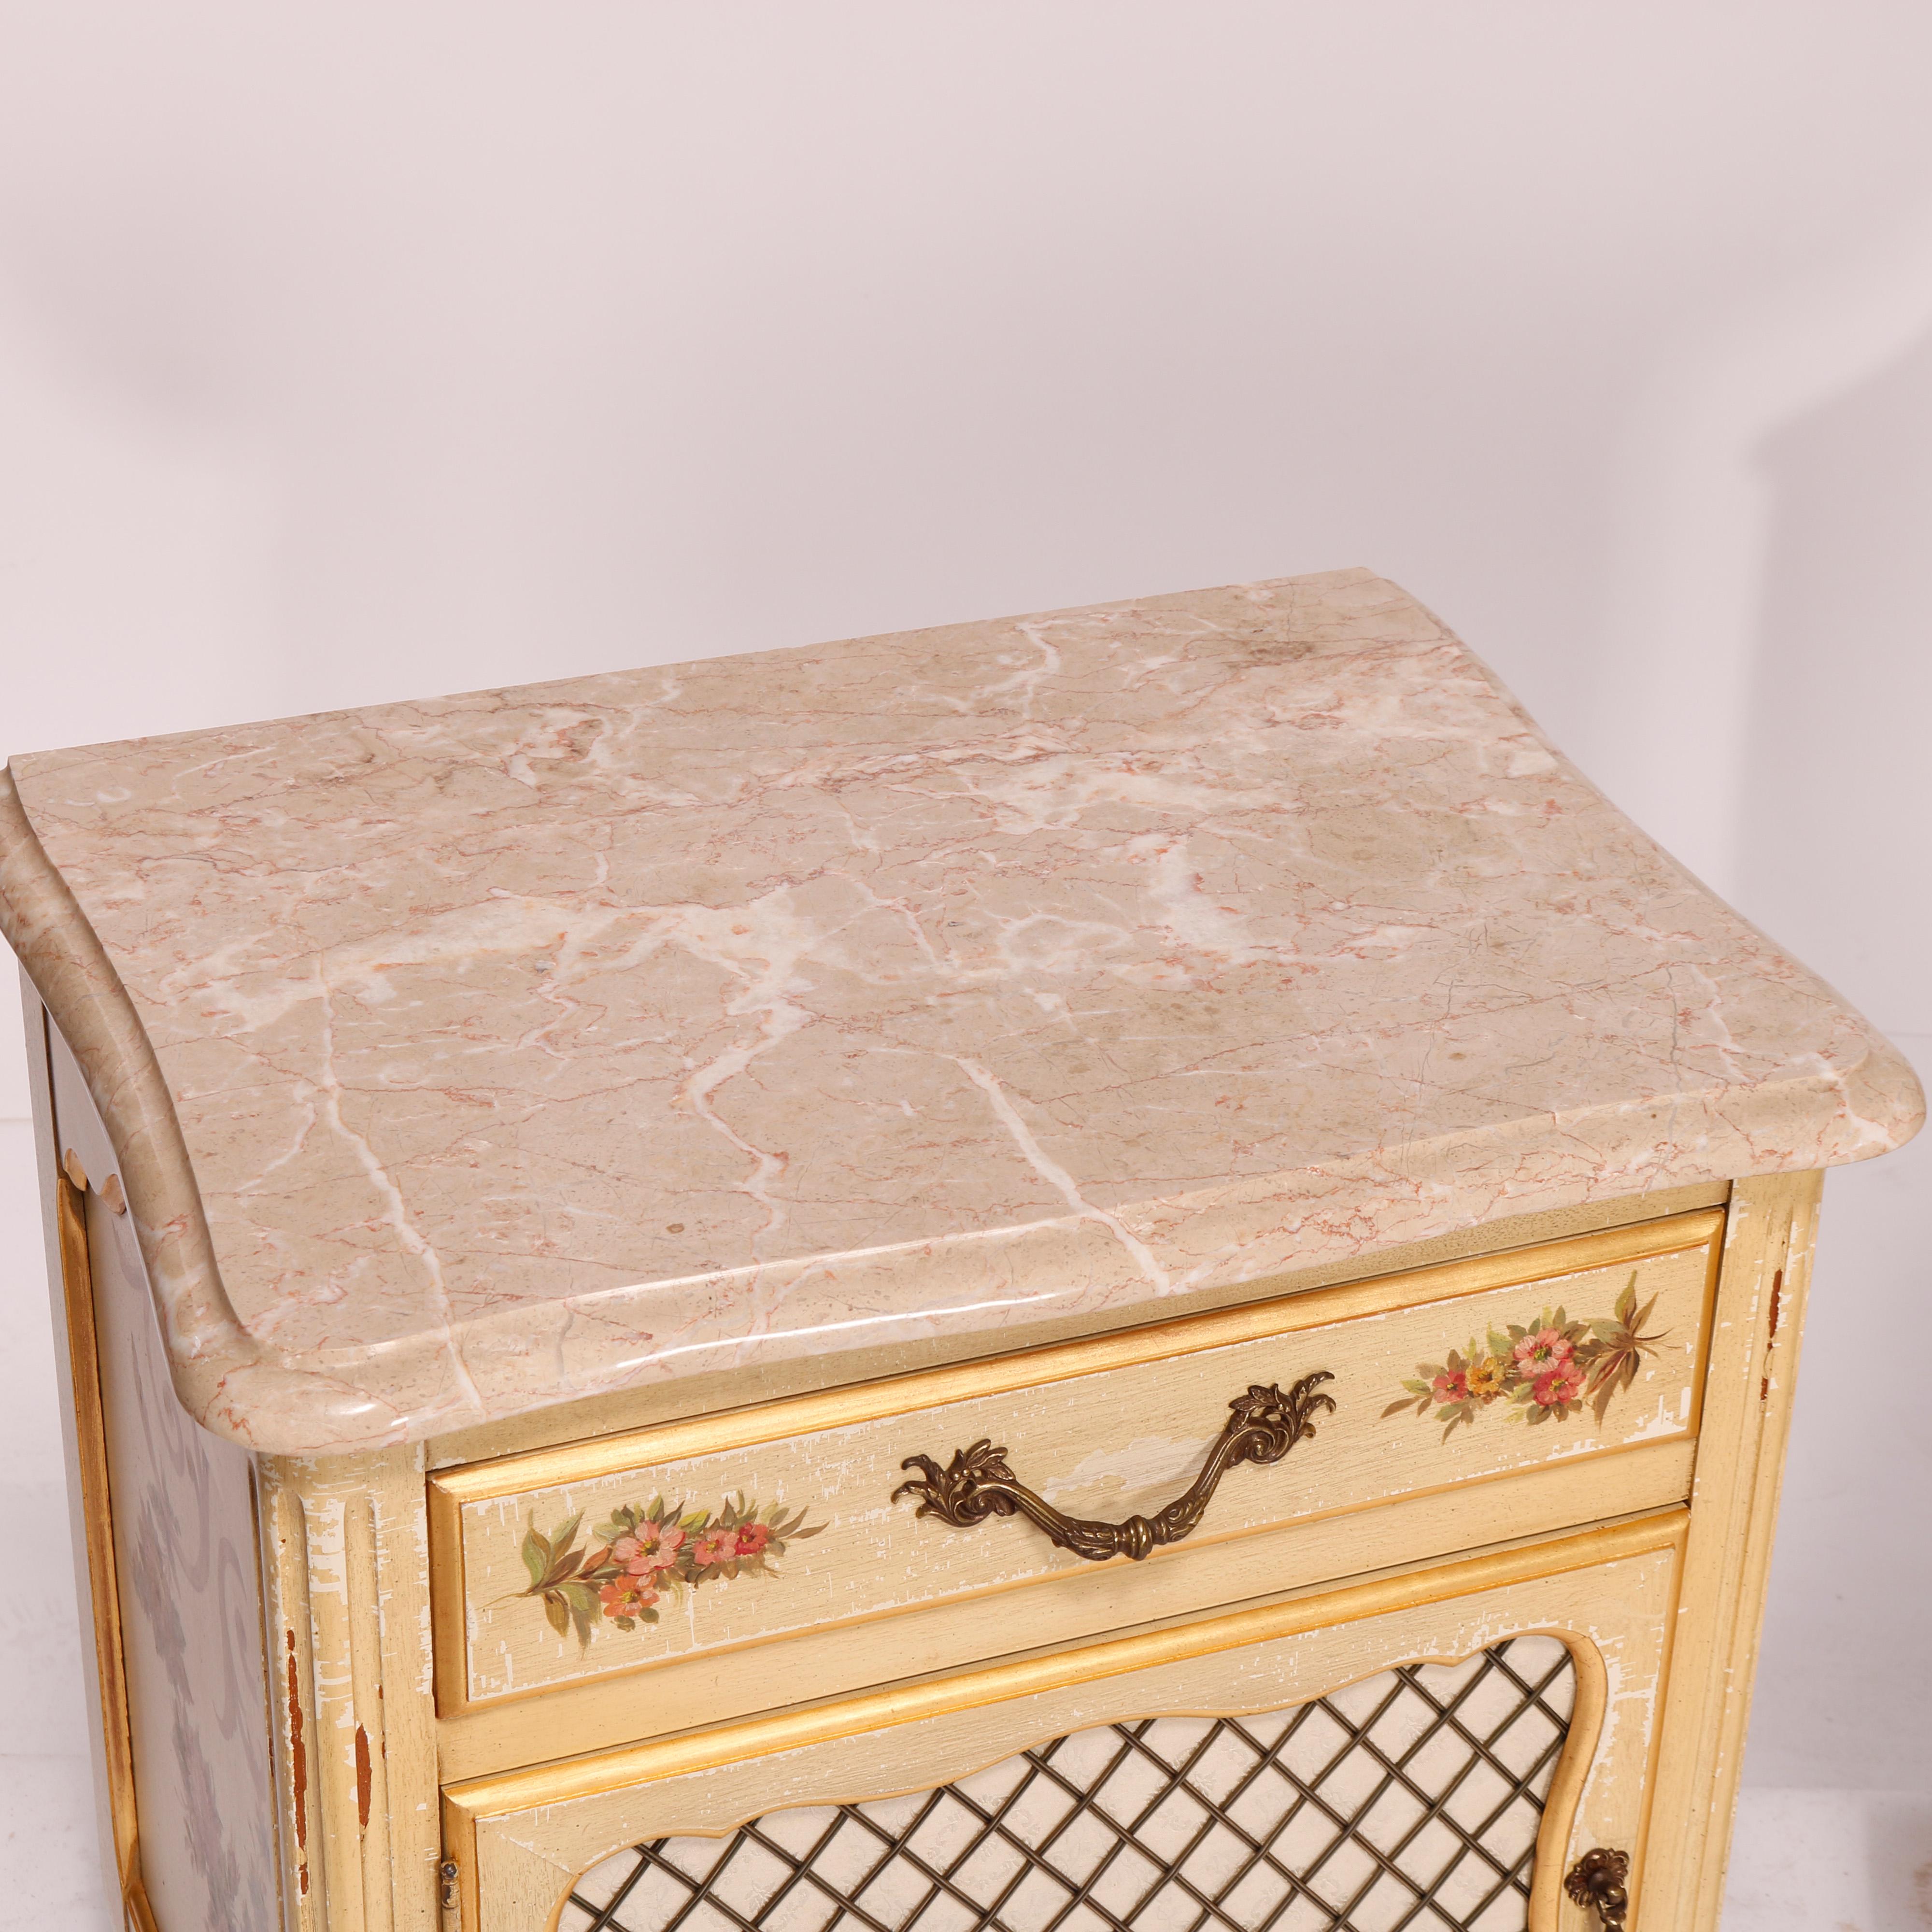 20th Century French Provincial Style Polychrome, Gilt & Marble Stands by Kozak Studios 20thC For Sale